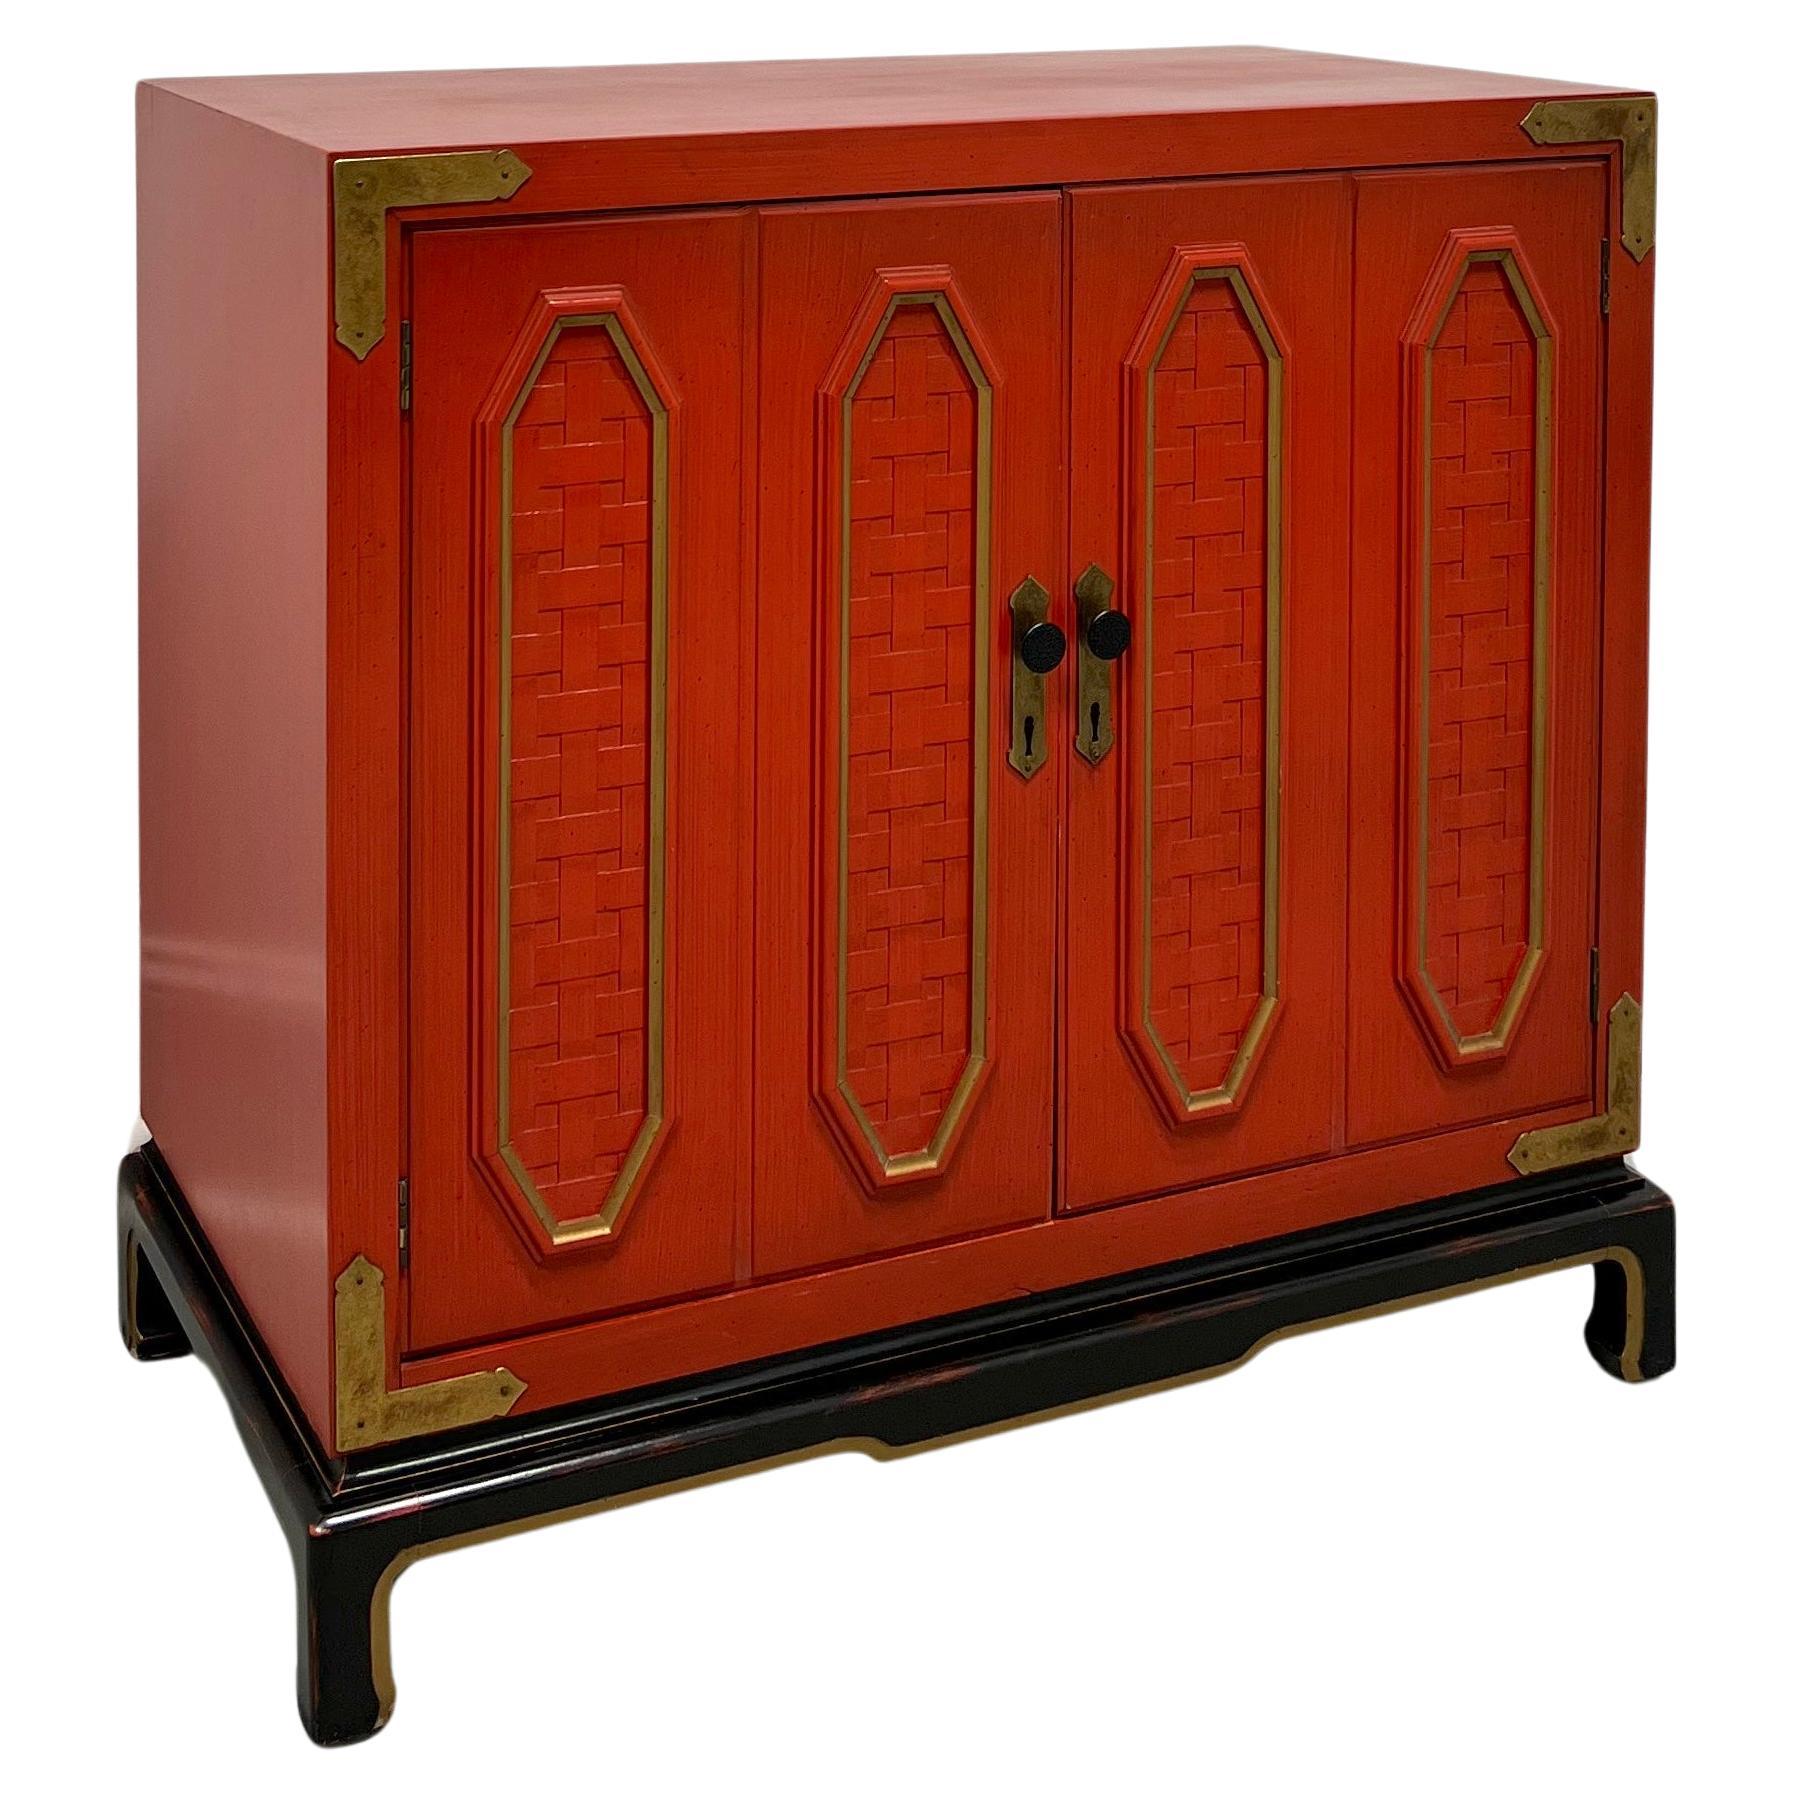 THOMASVILLE Red & Black Lacquered Asian Campaign Style Console Cabinet